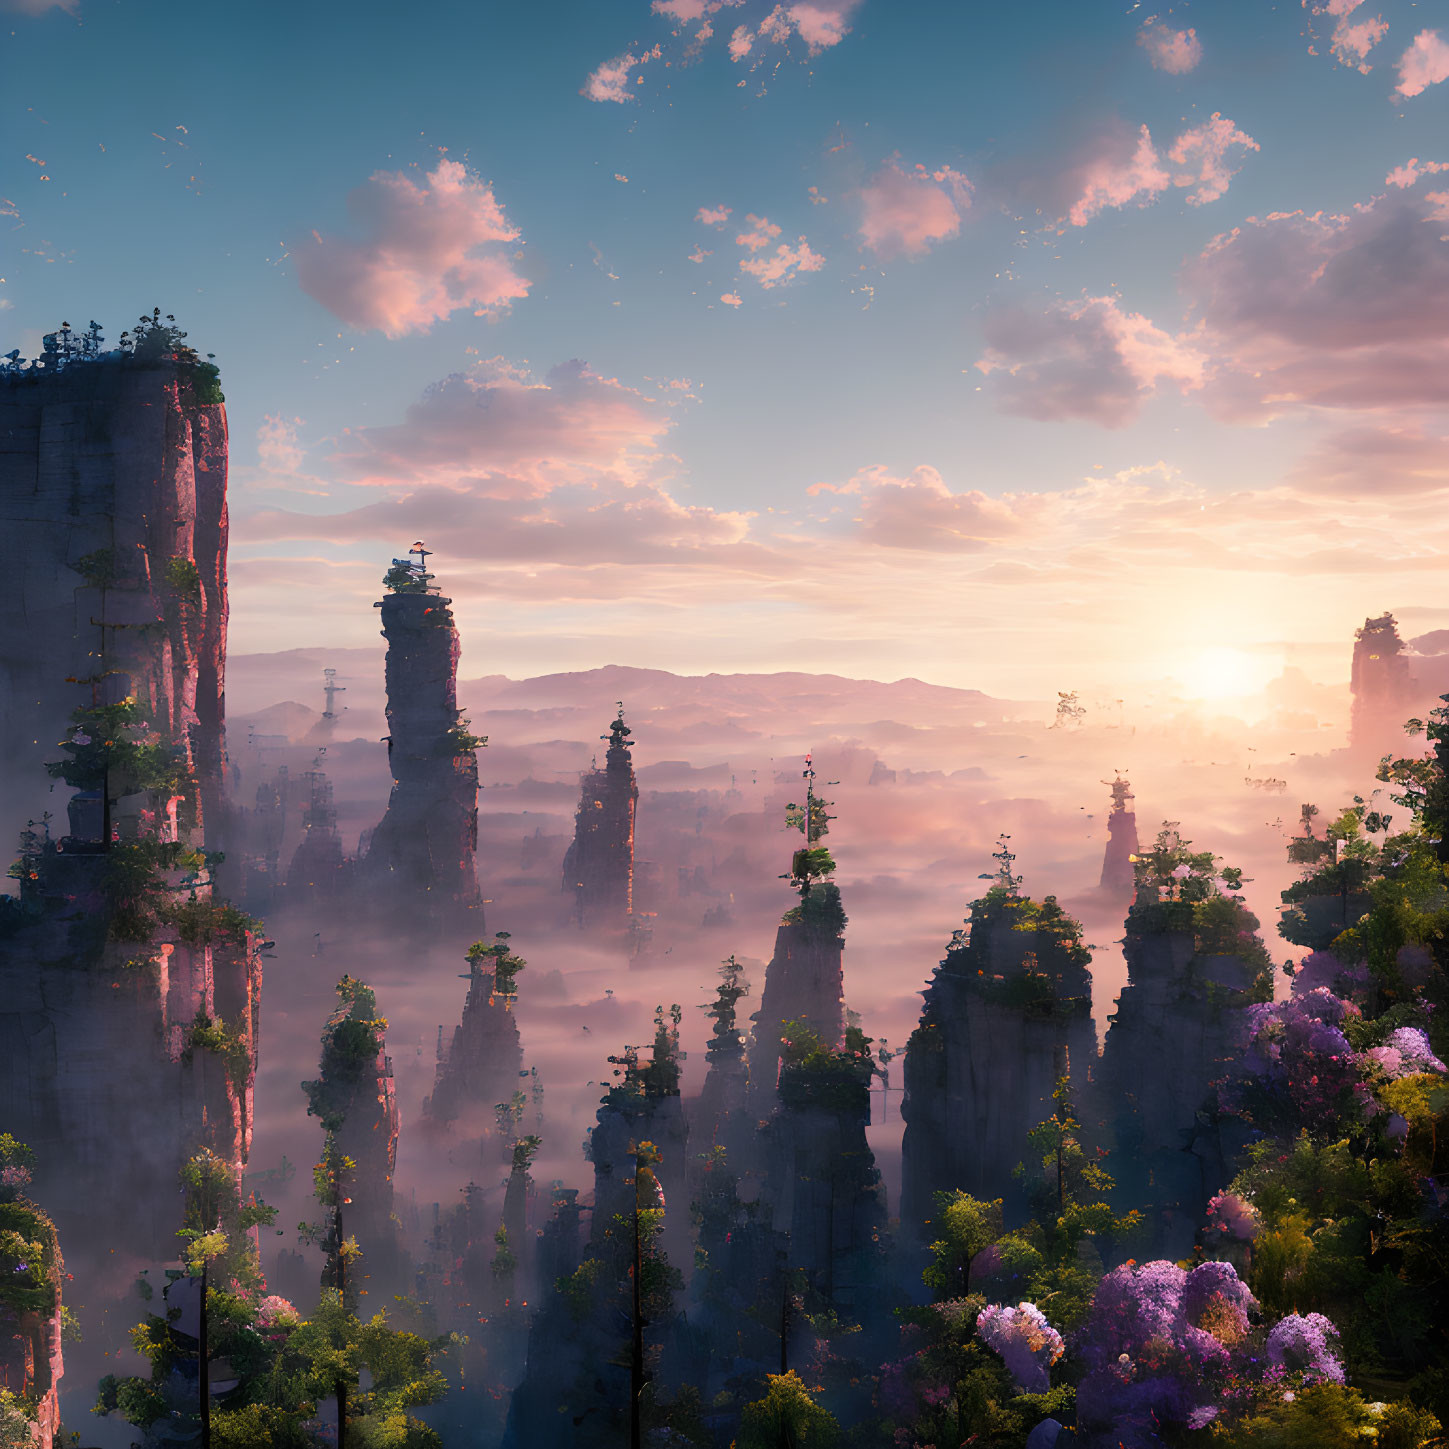 Majestic cliffs, misty forests, purple flowers, and a stunning sunrise landscape